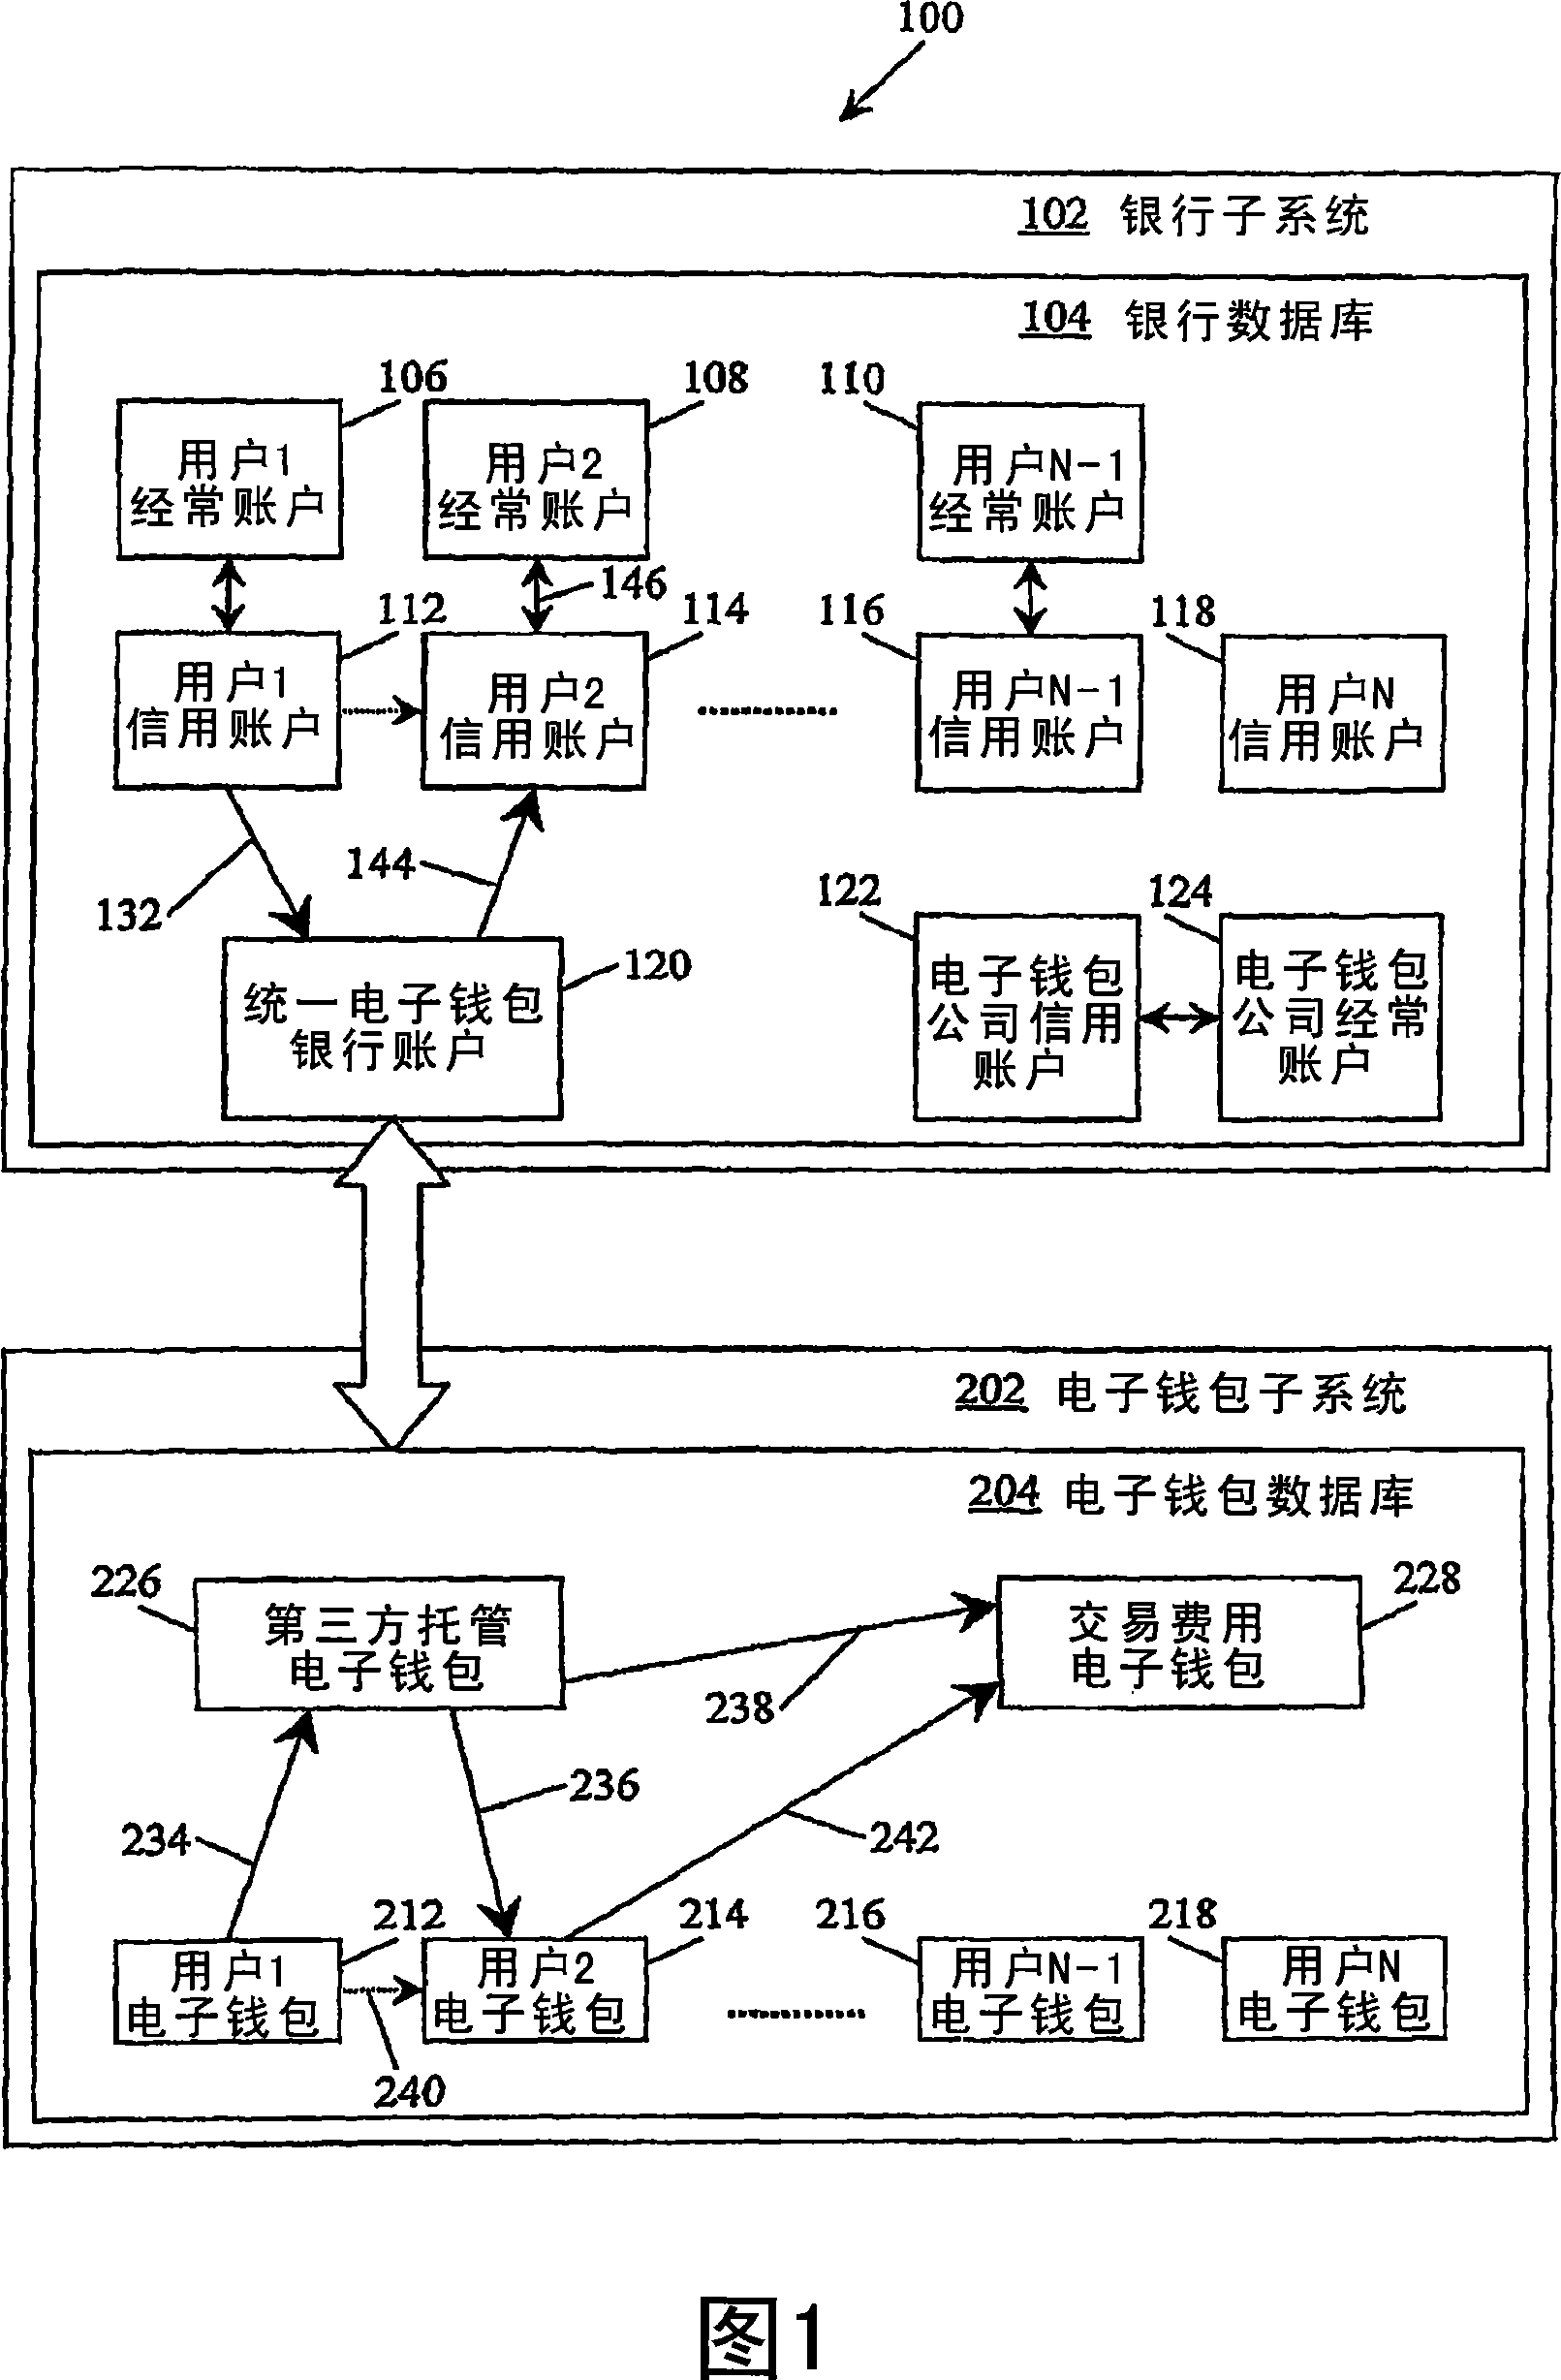 An electronic-purse transaction method and system